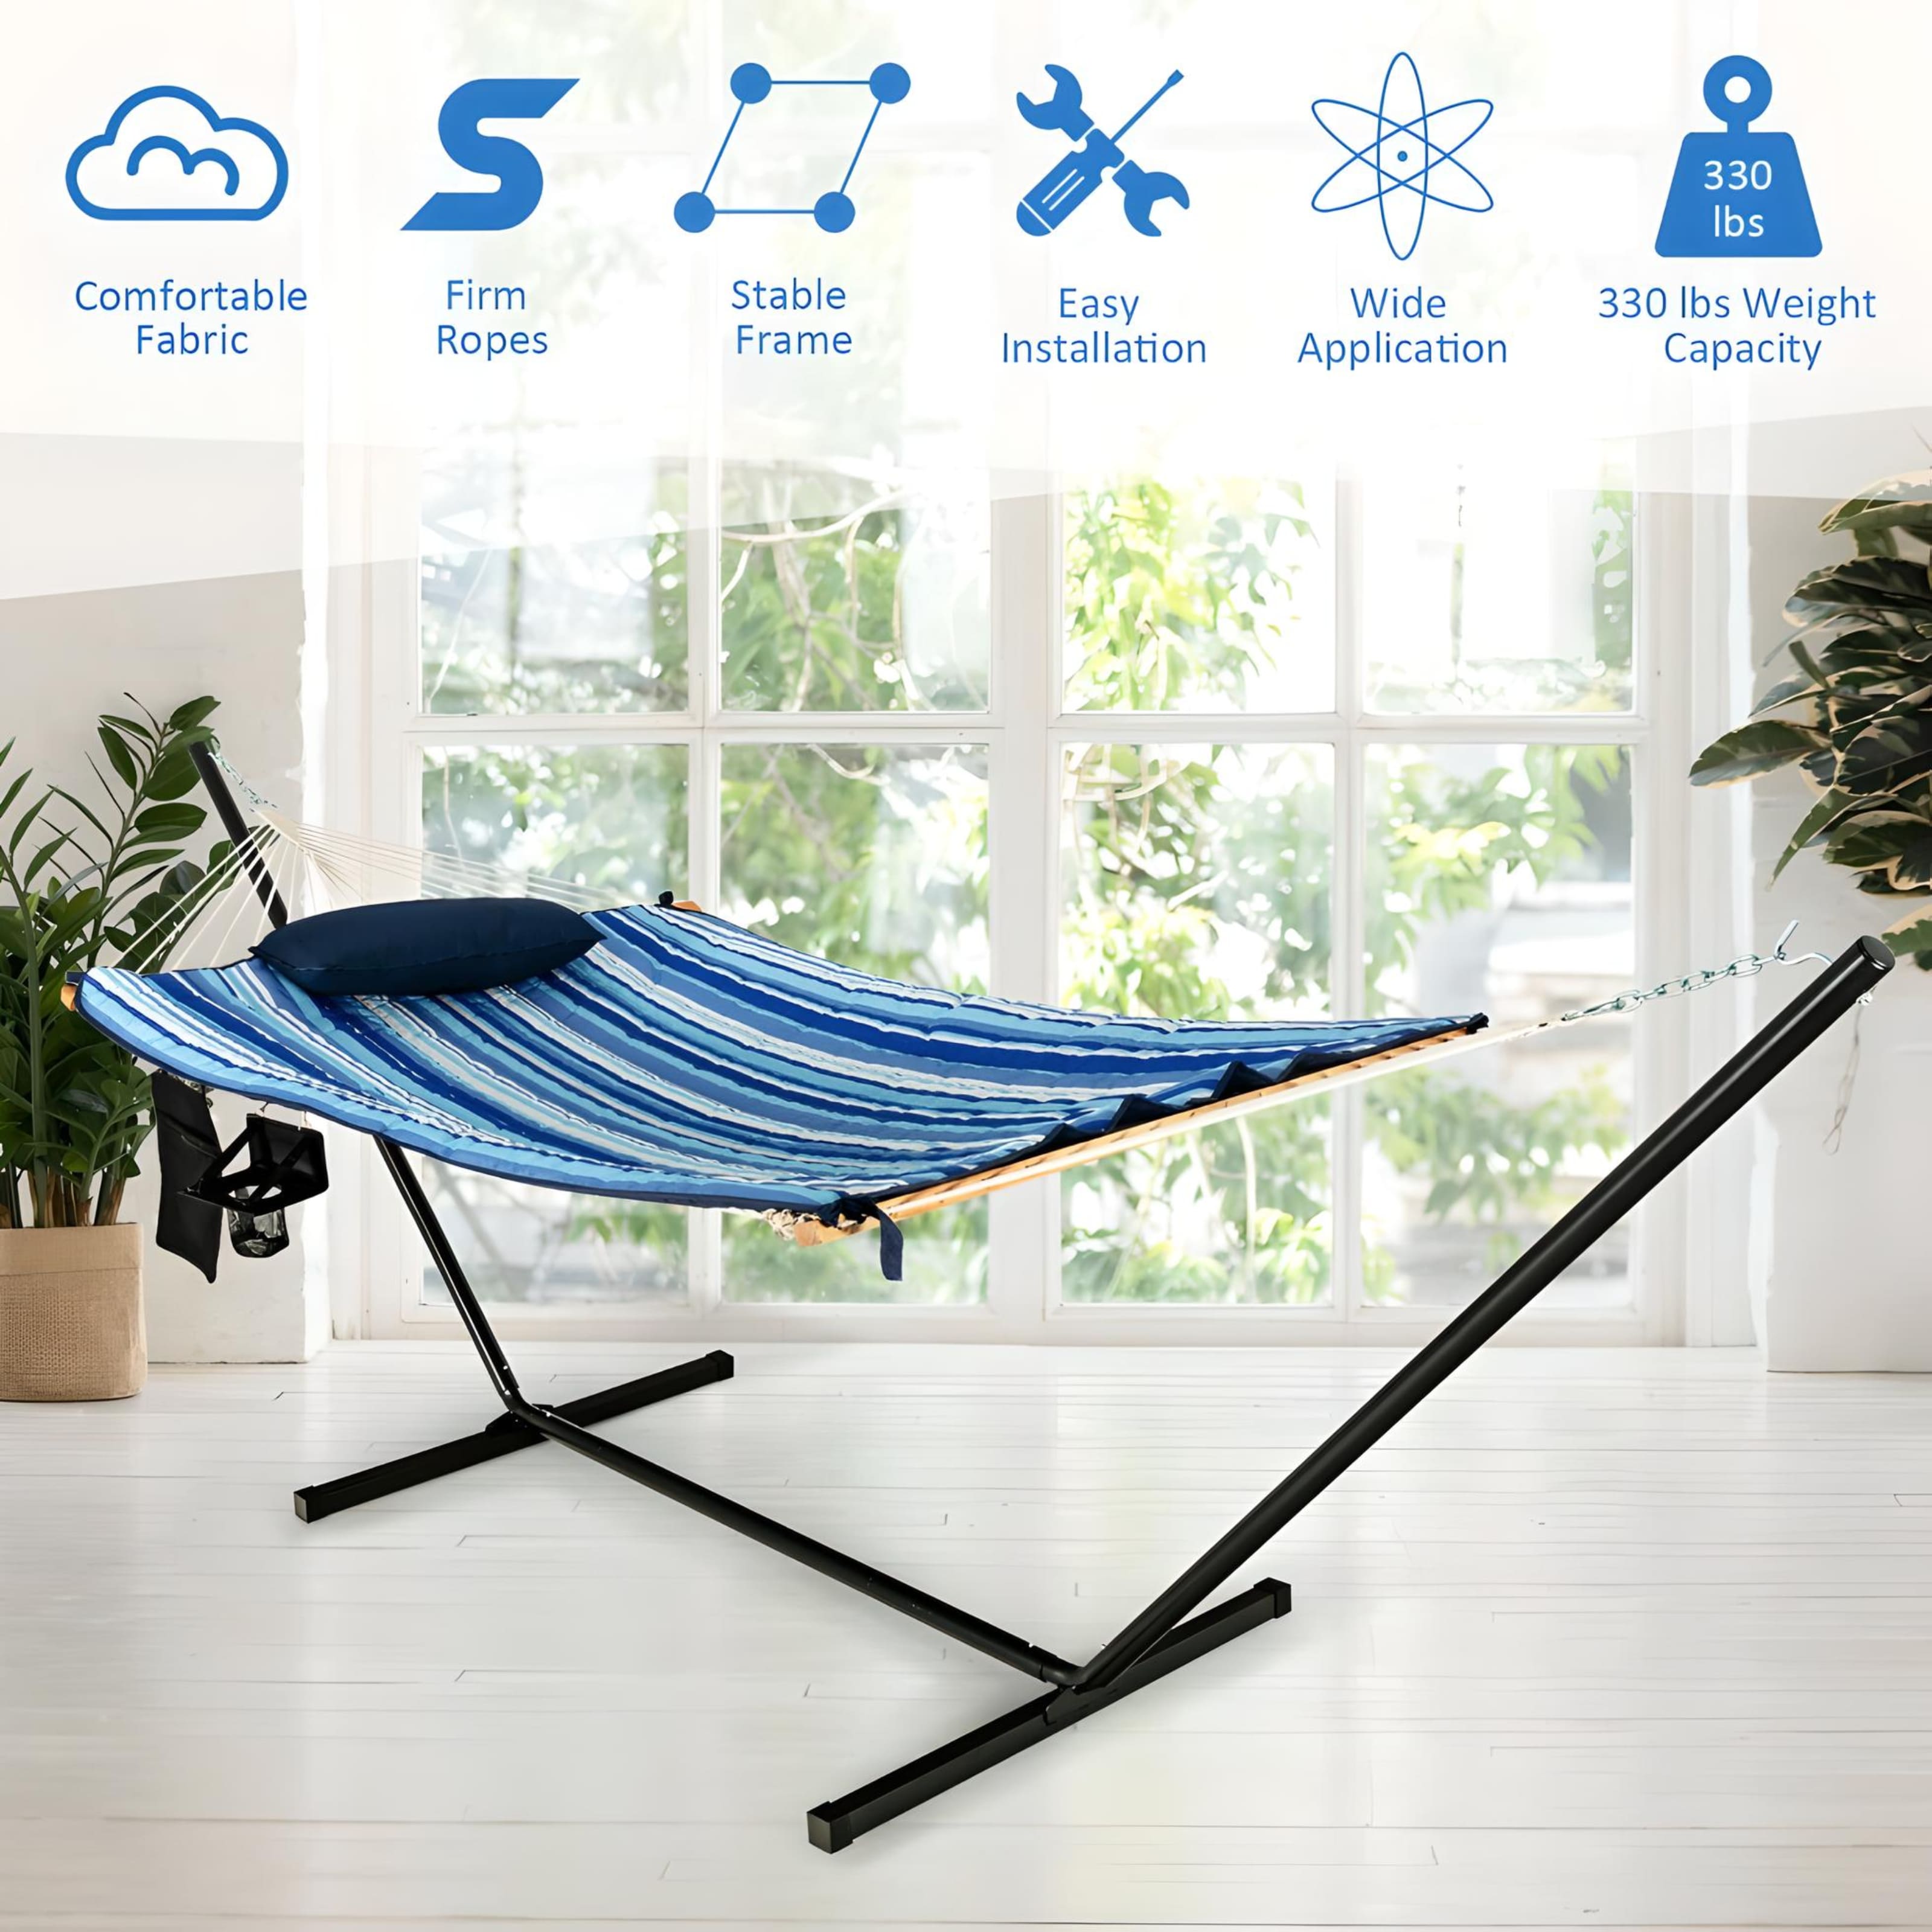 2-person-outdoor-hammock-at-home